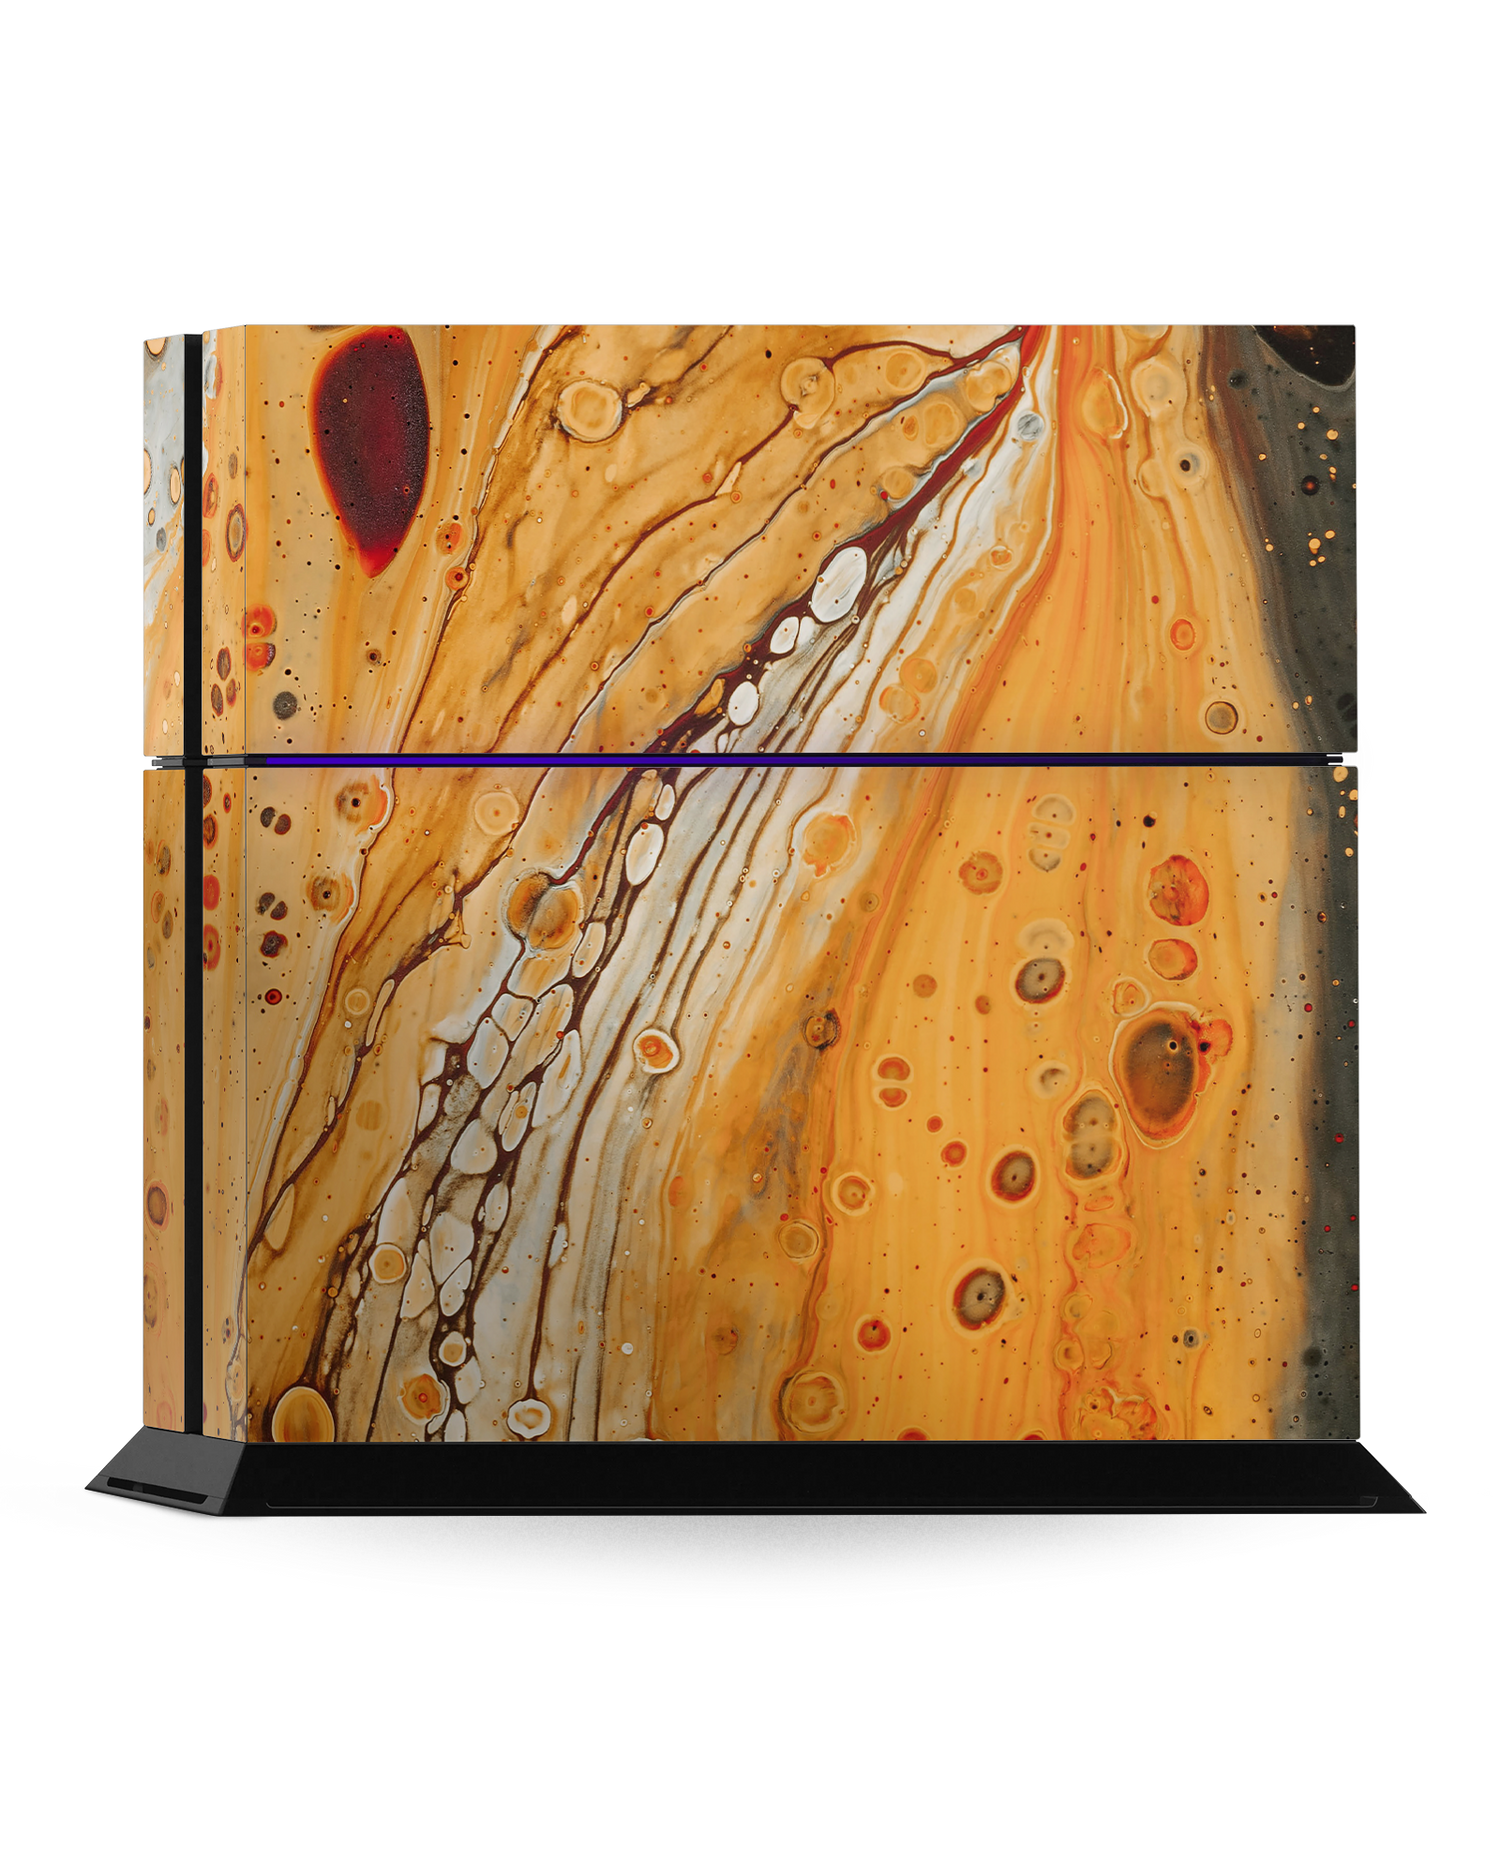 Jupiter Console Skin for Sony PlayStation 4: Standing